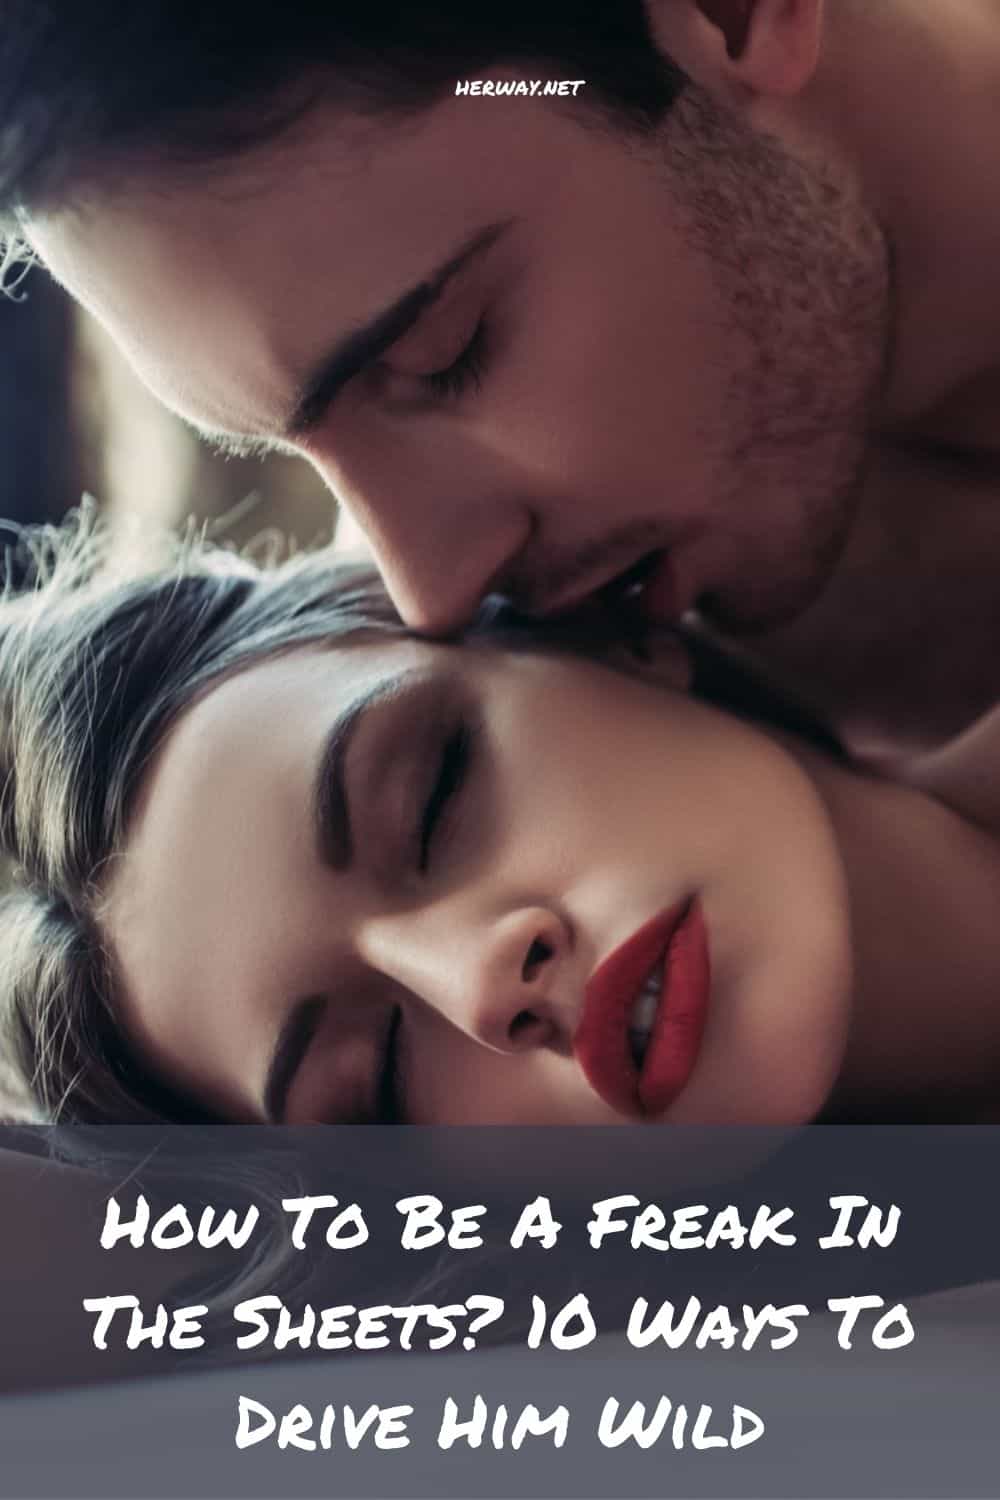 How To Be A Freak In The Sheets 10 Ways To Drive Him Wild